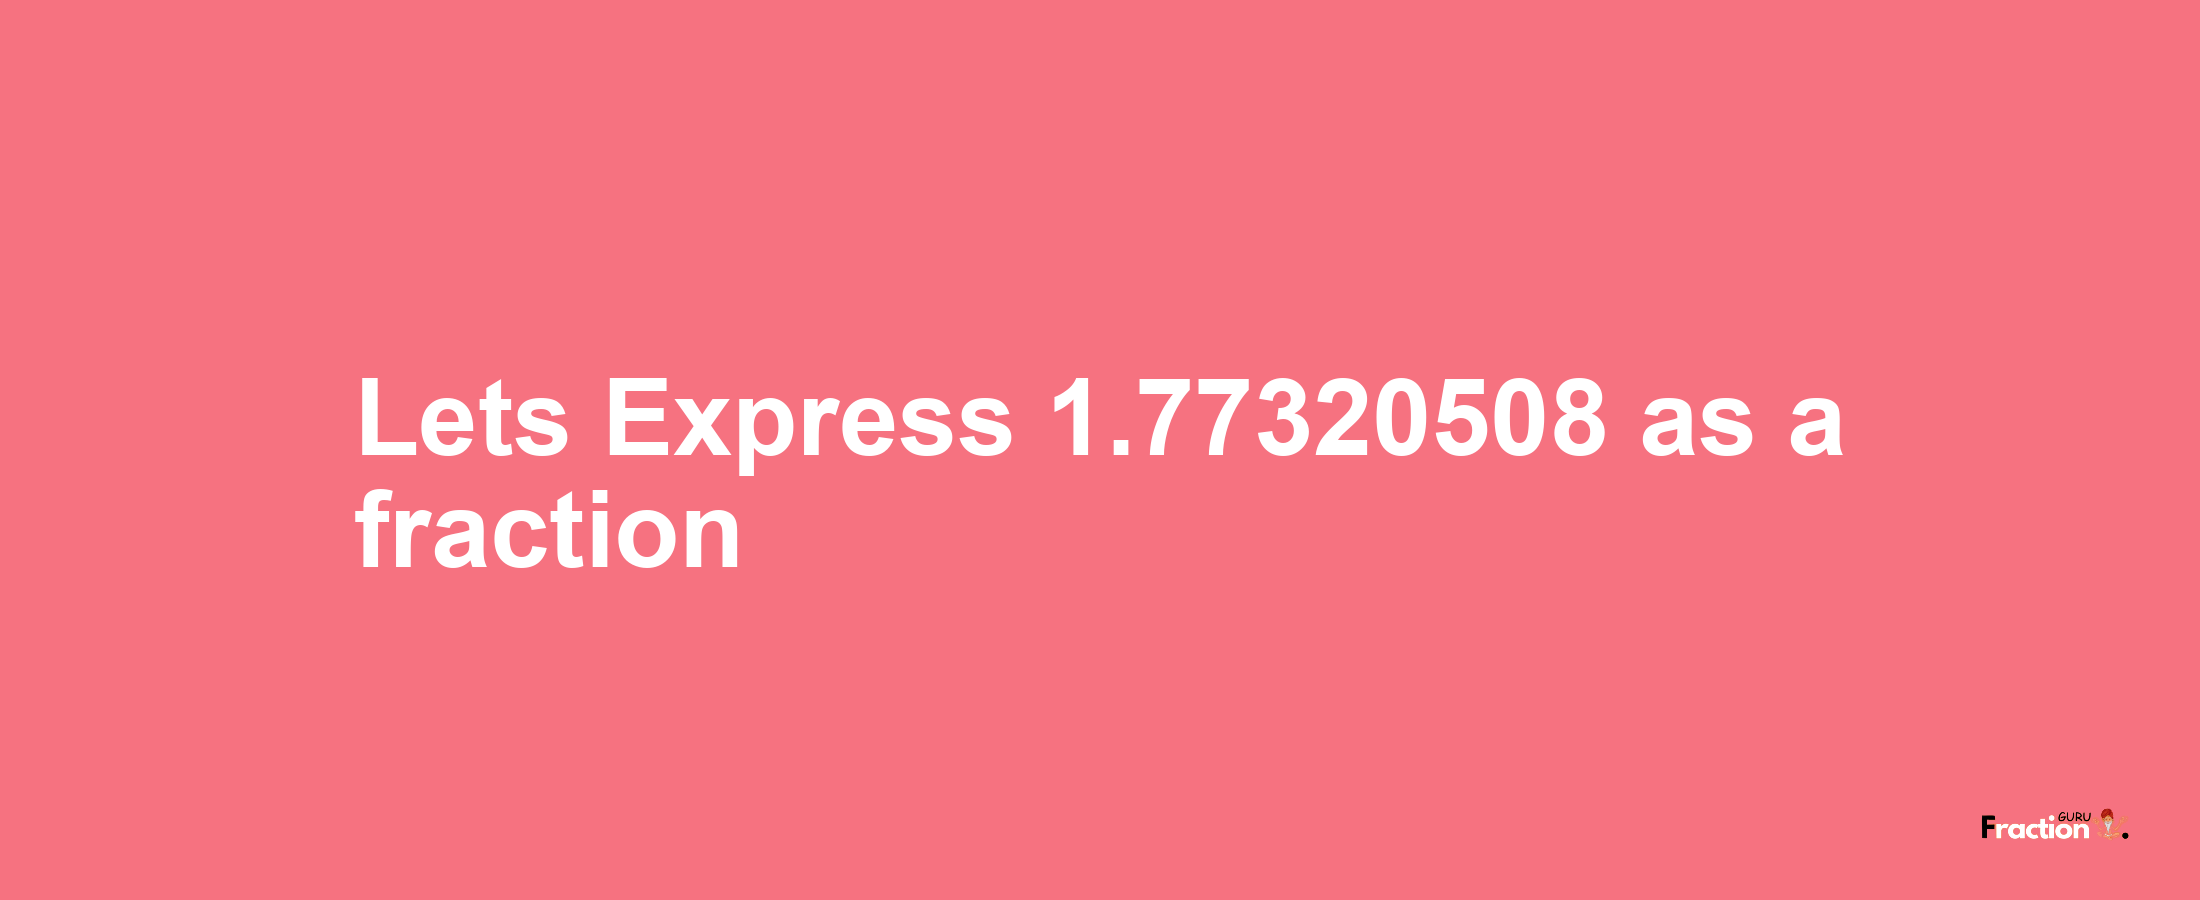 Lets Express 1.77320508 as afraction